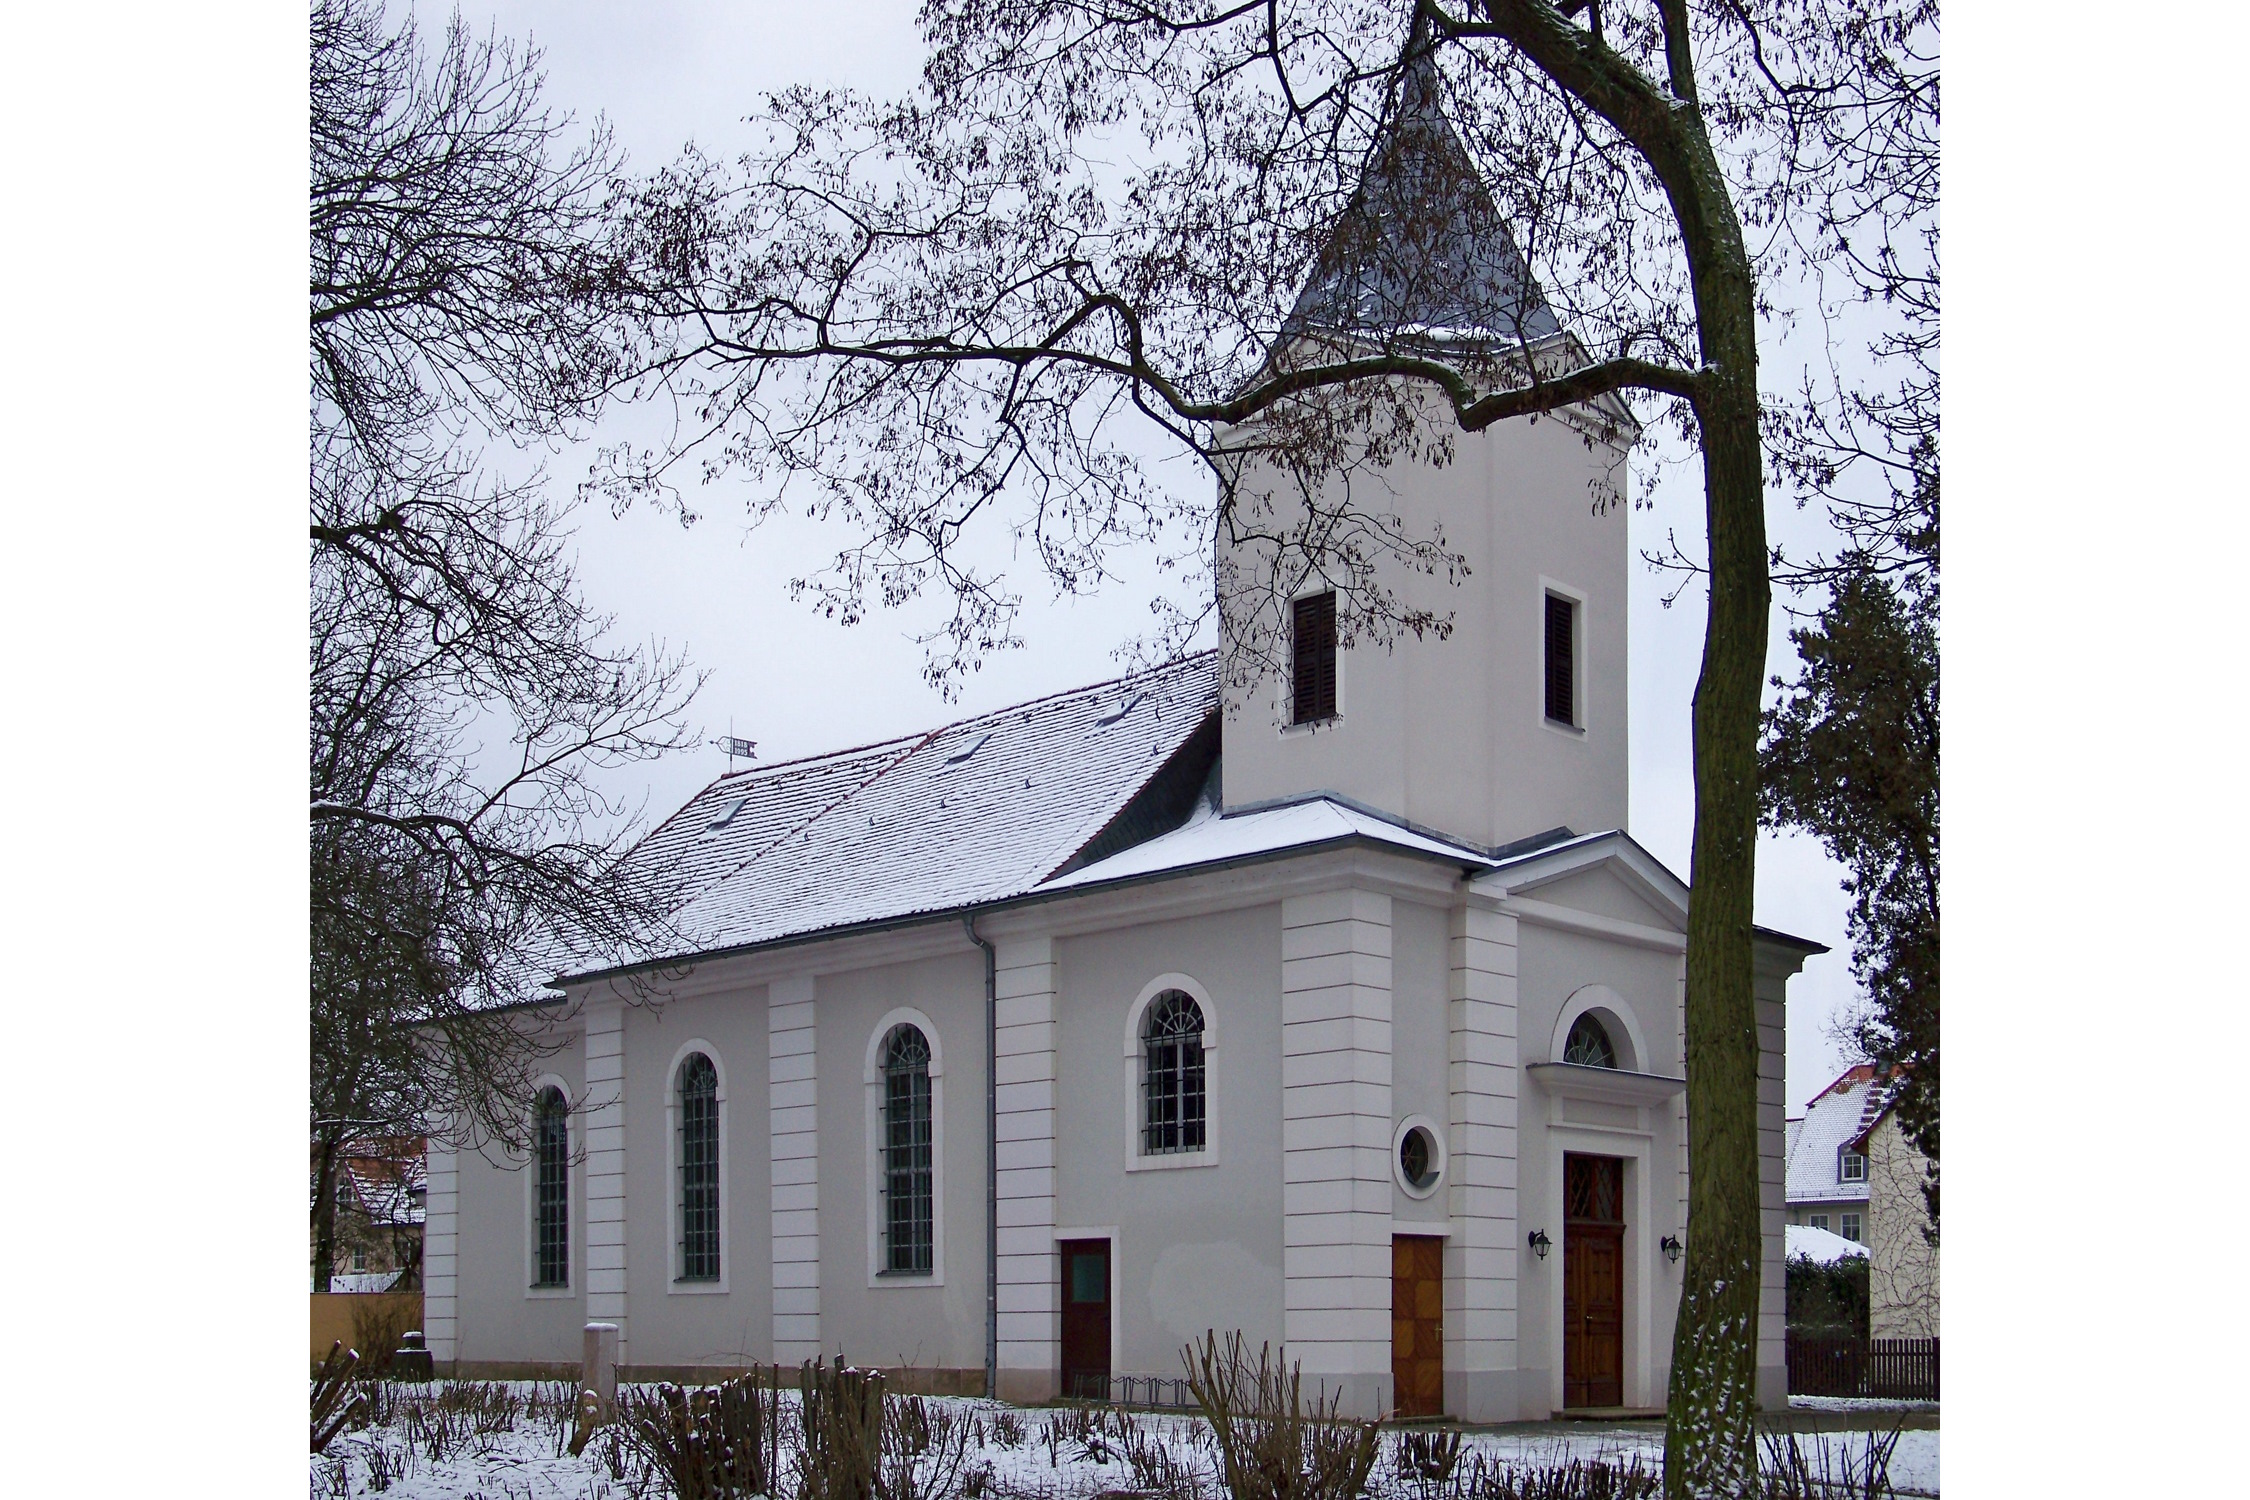 Immanuelkirche Probstheida (Joeb07, CC BY 3.0, https://commons.wikimedia.org/w/index.php?curid=9552386) 